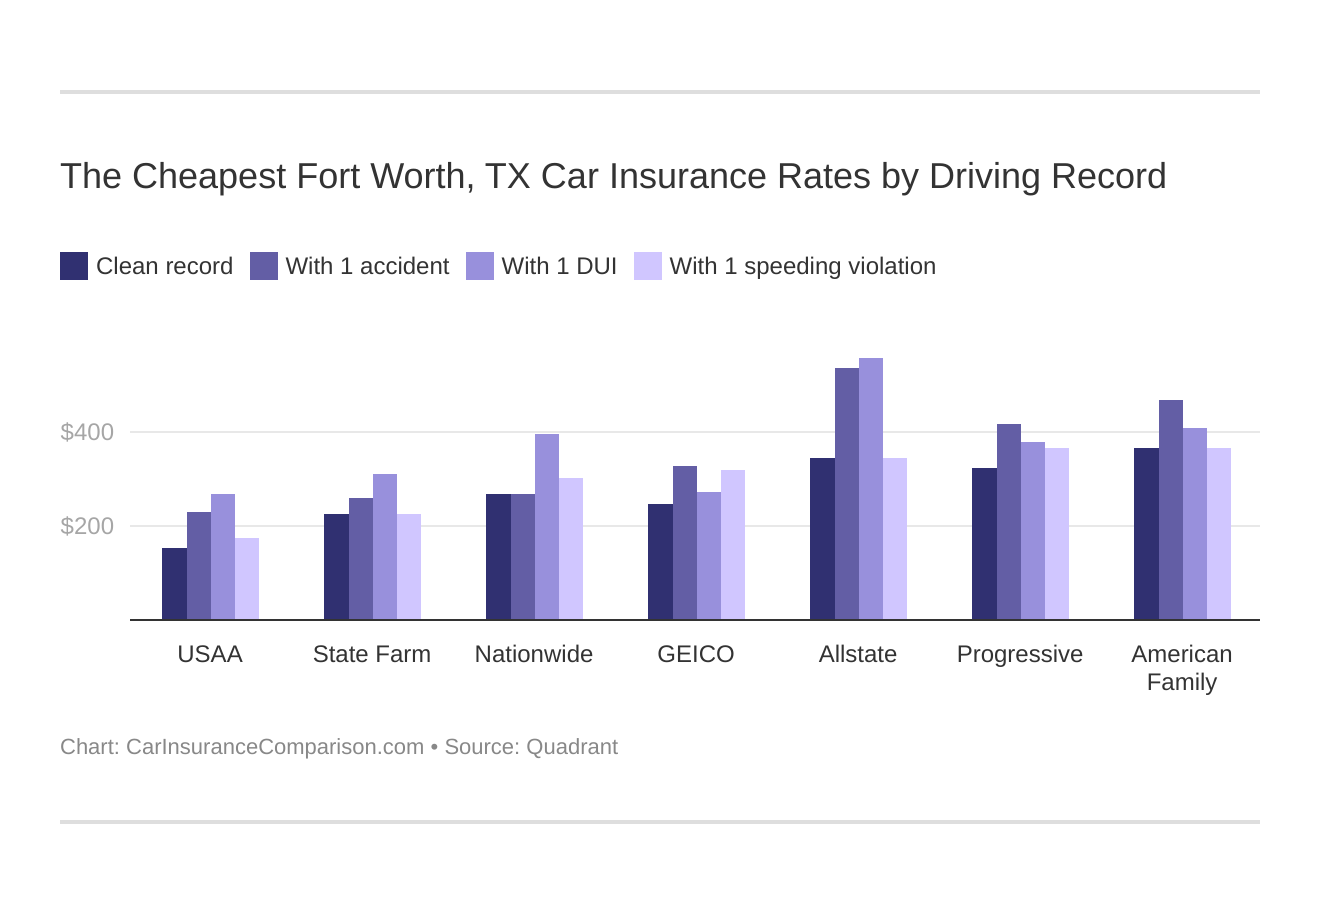 The Cheapest Fort Worth, TX Car Insurance Rates by Driving Record